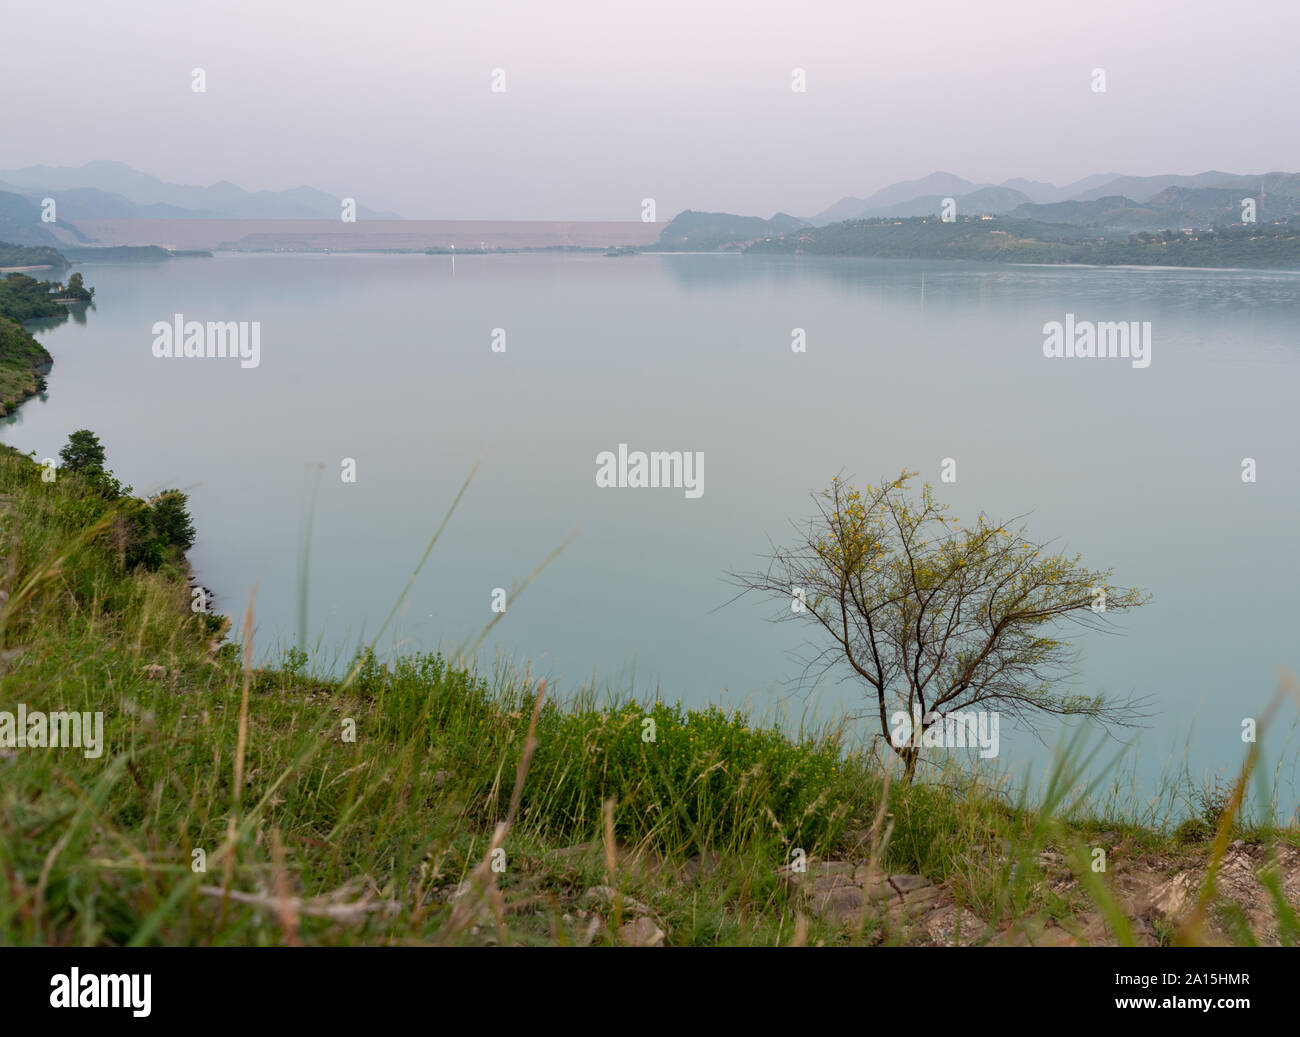 Tarbela Lake and Tarbela Dam wall from a distance Stock Photo